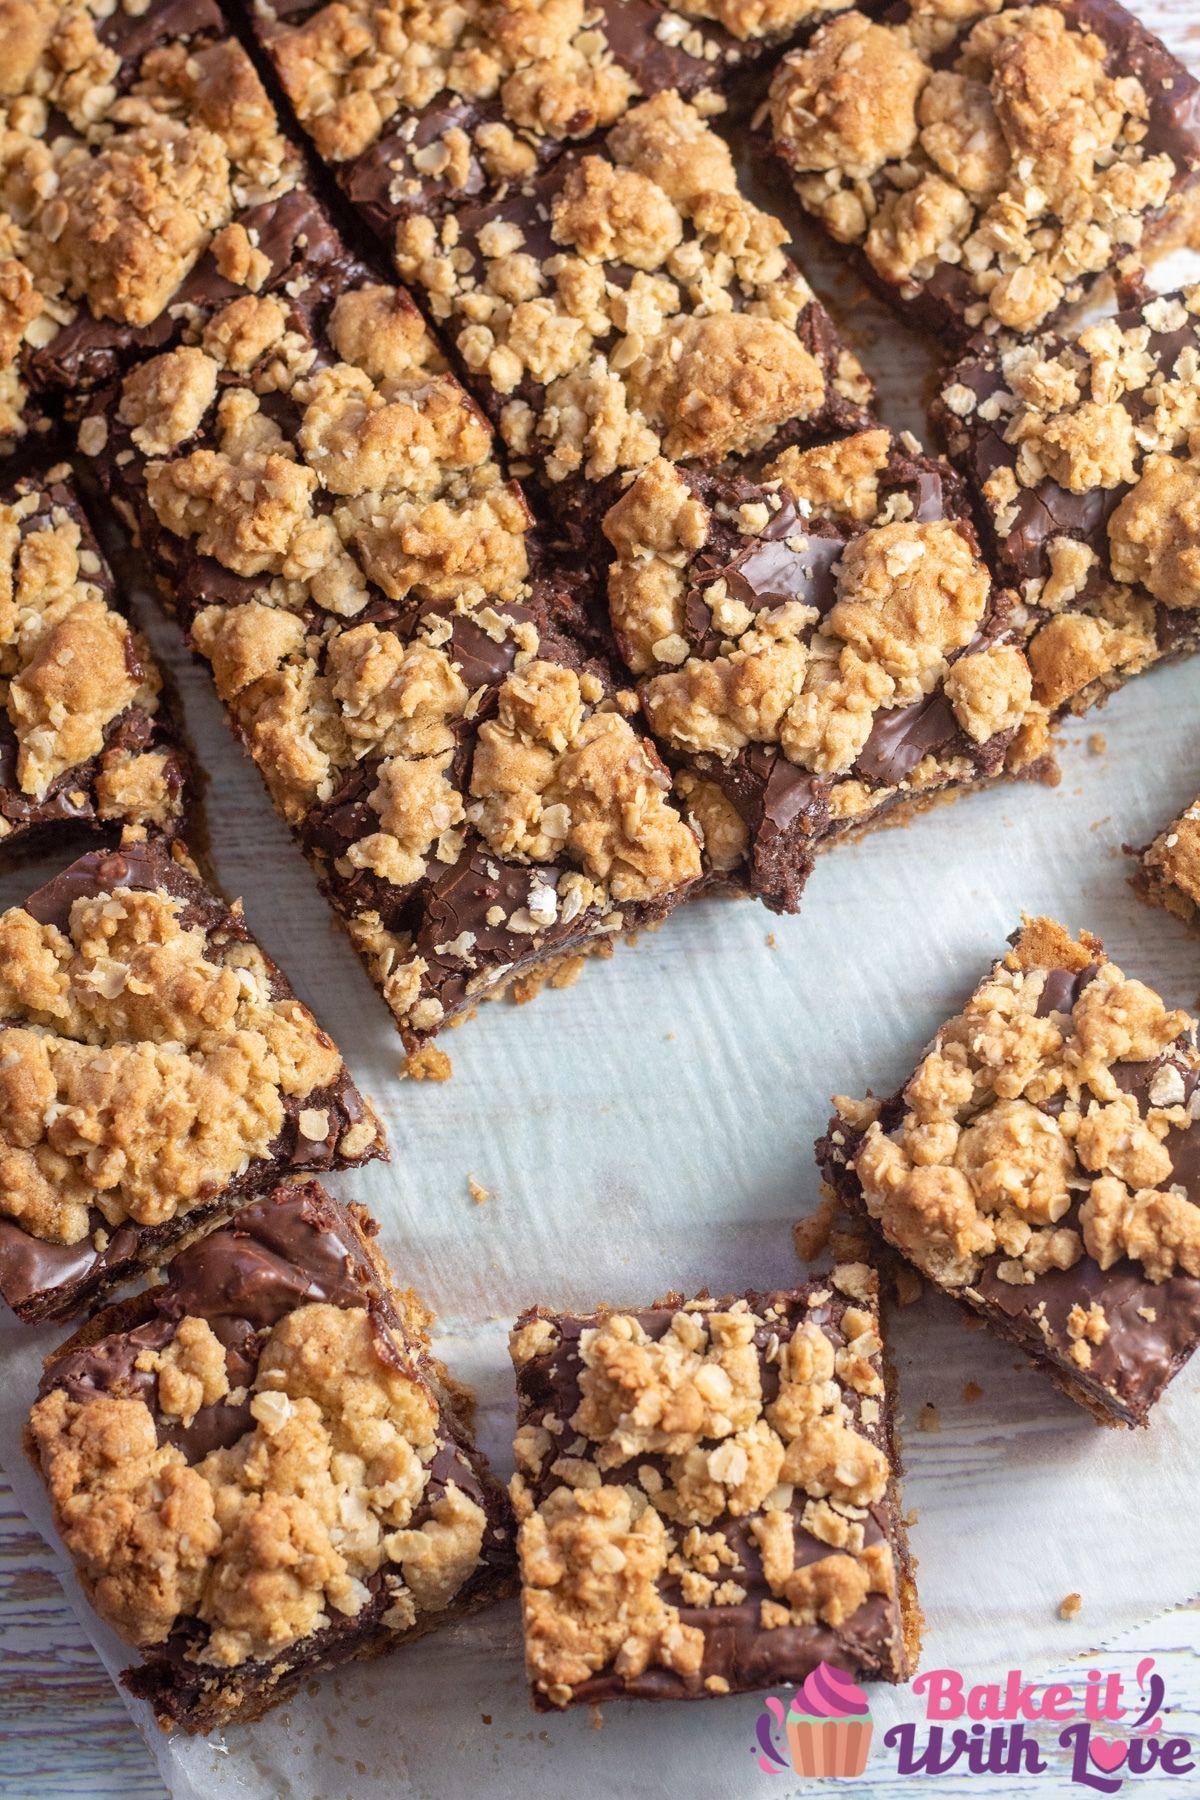 Tall overhead image of the chocolate revel bars with oatmeal crust and crumble topping.